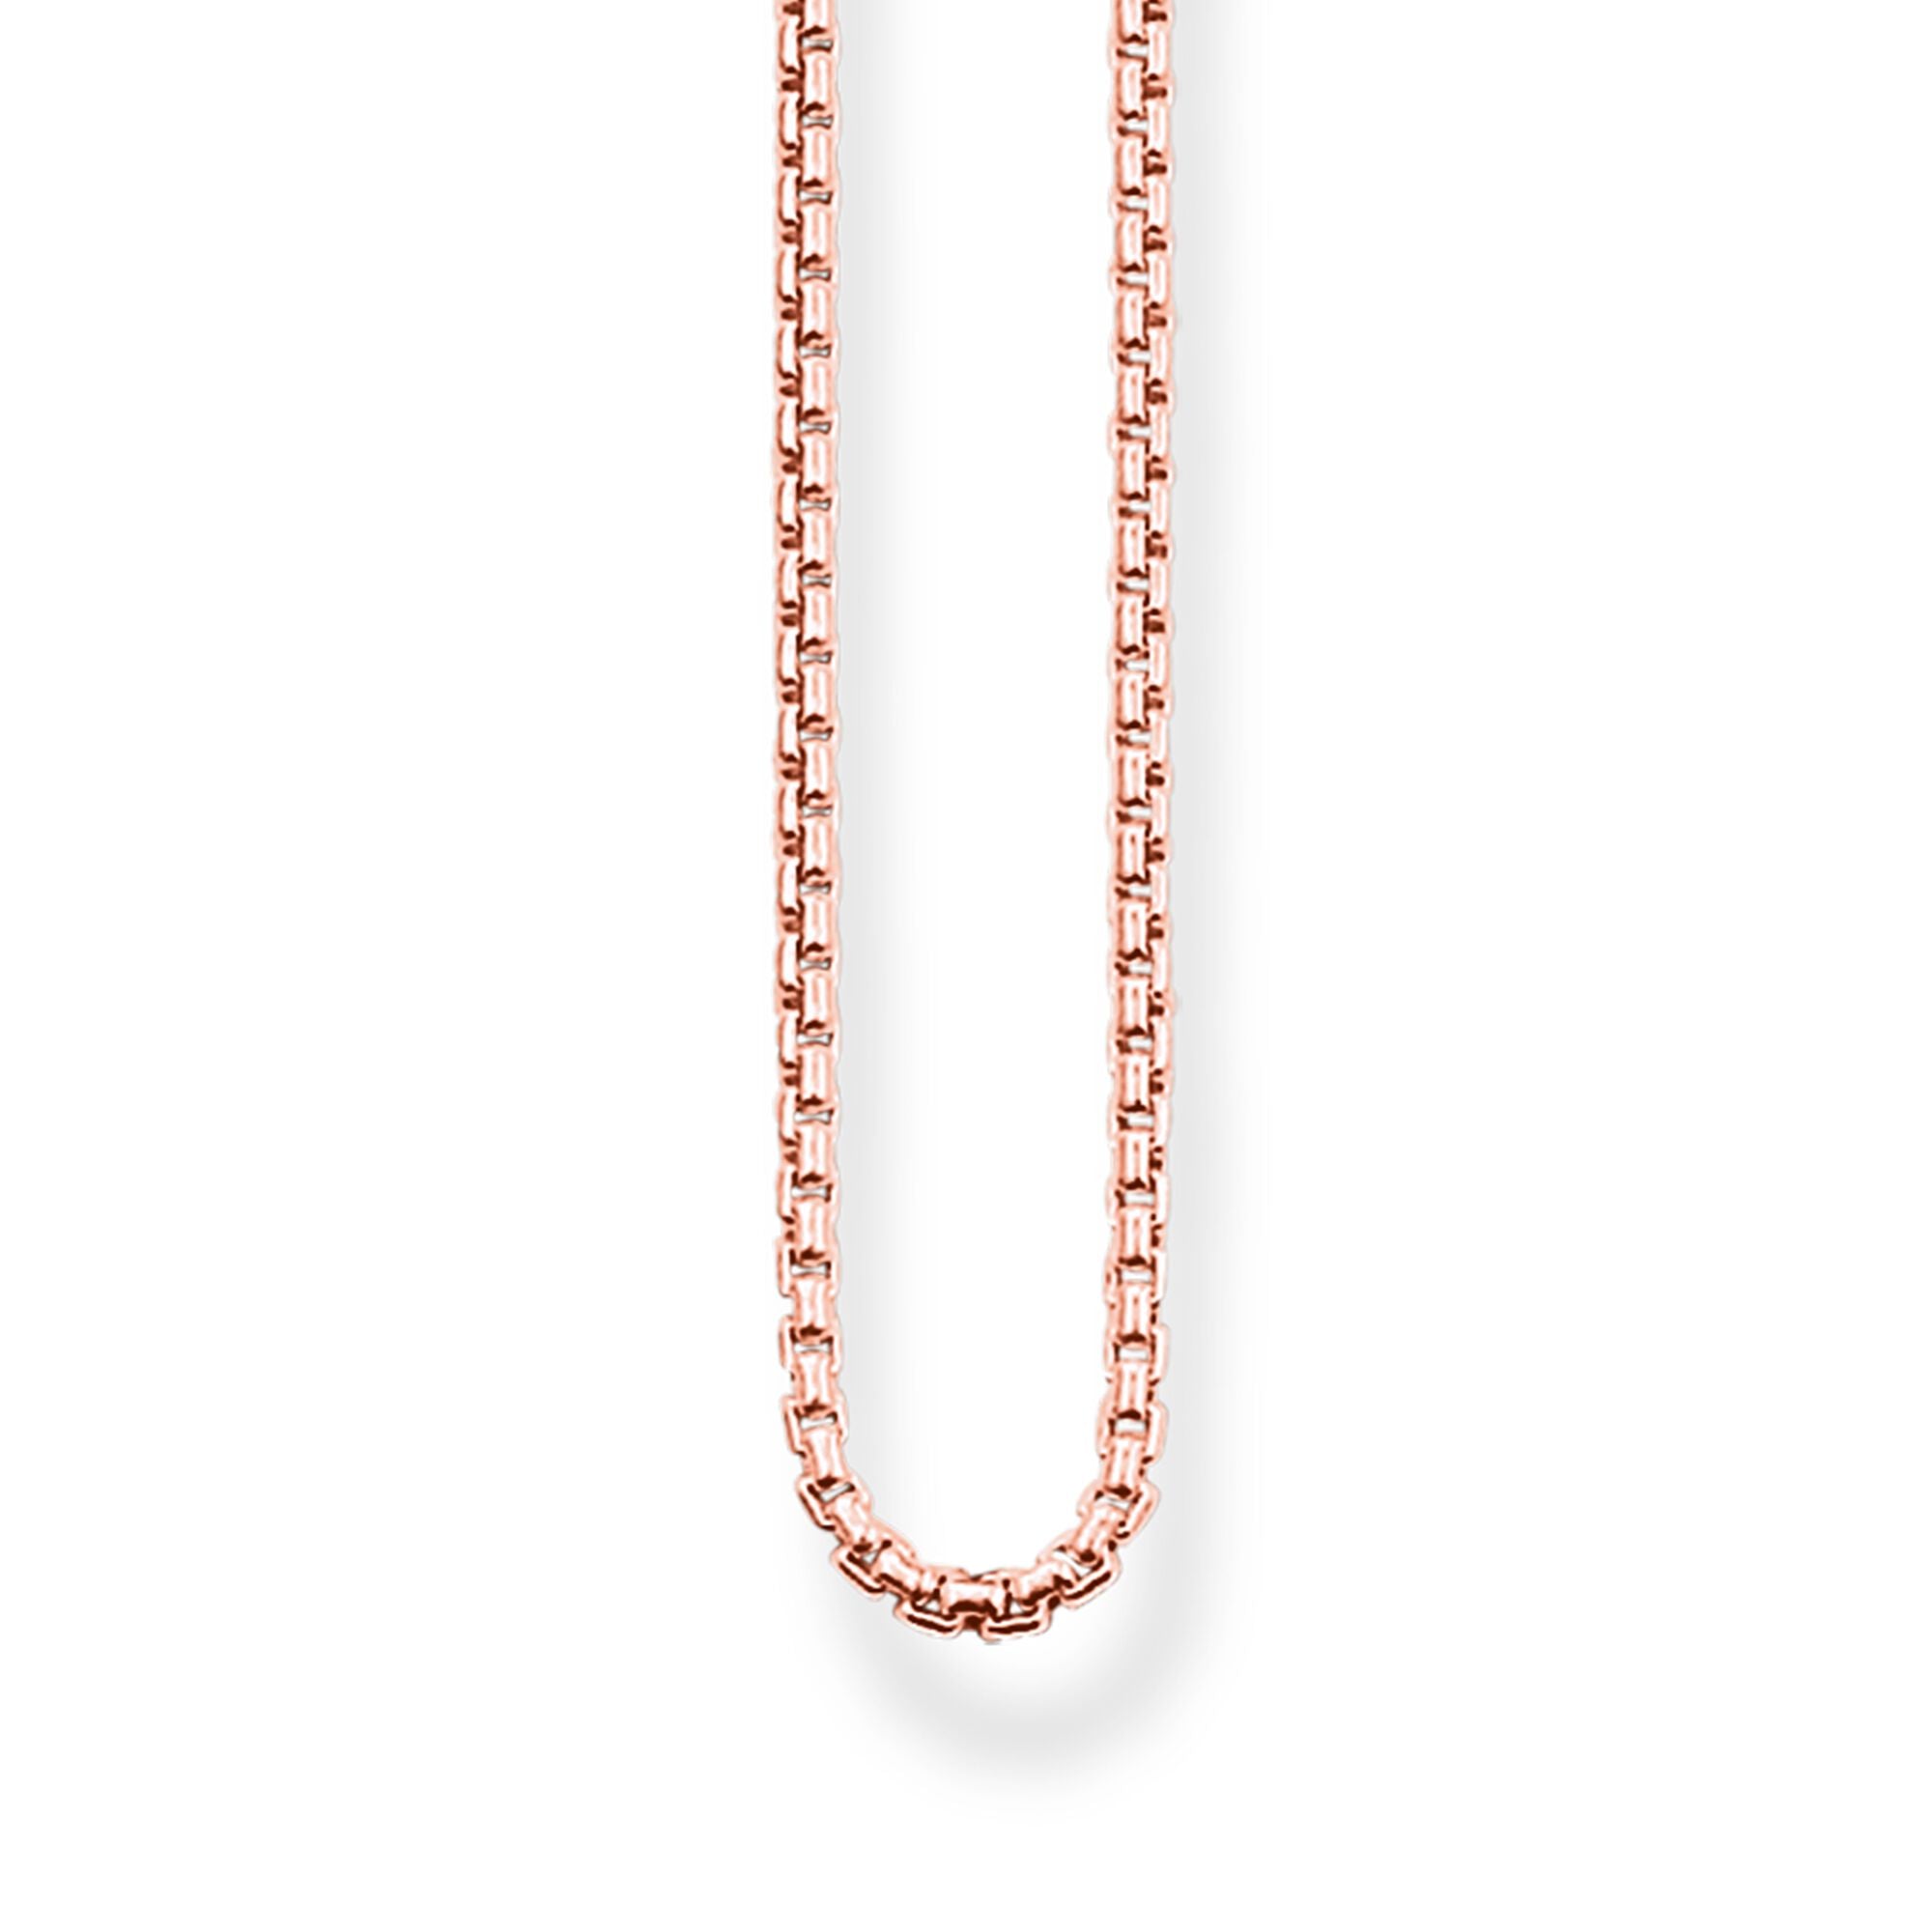 Thomas Sabo 18k Rose Gold Plated 925 Sterling Silver Chain